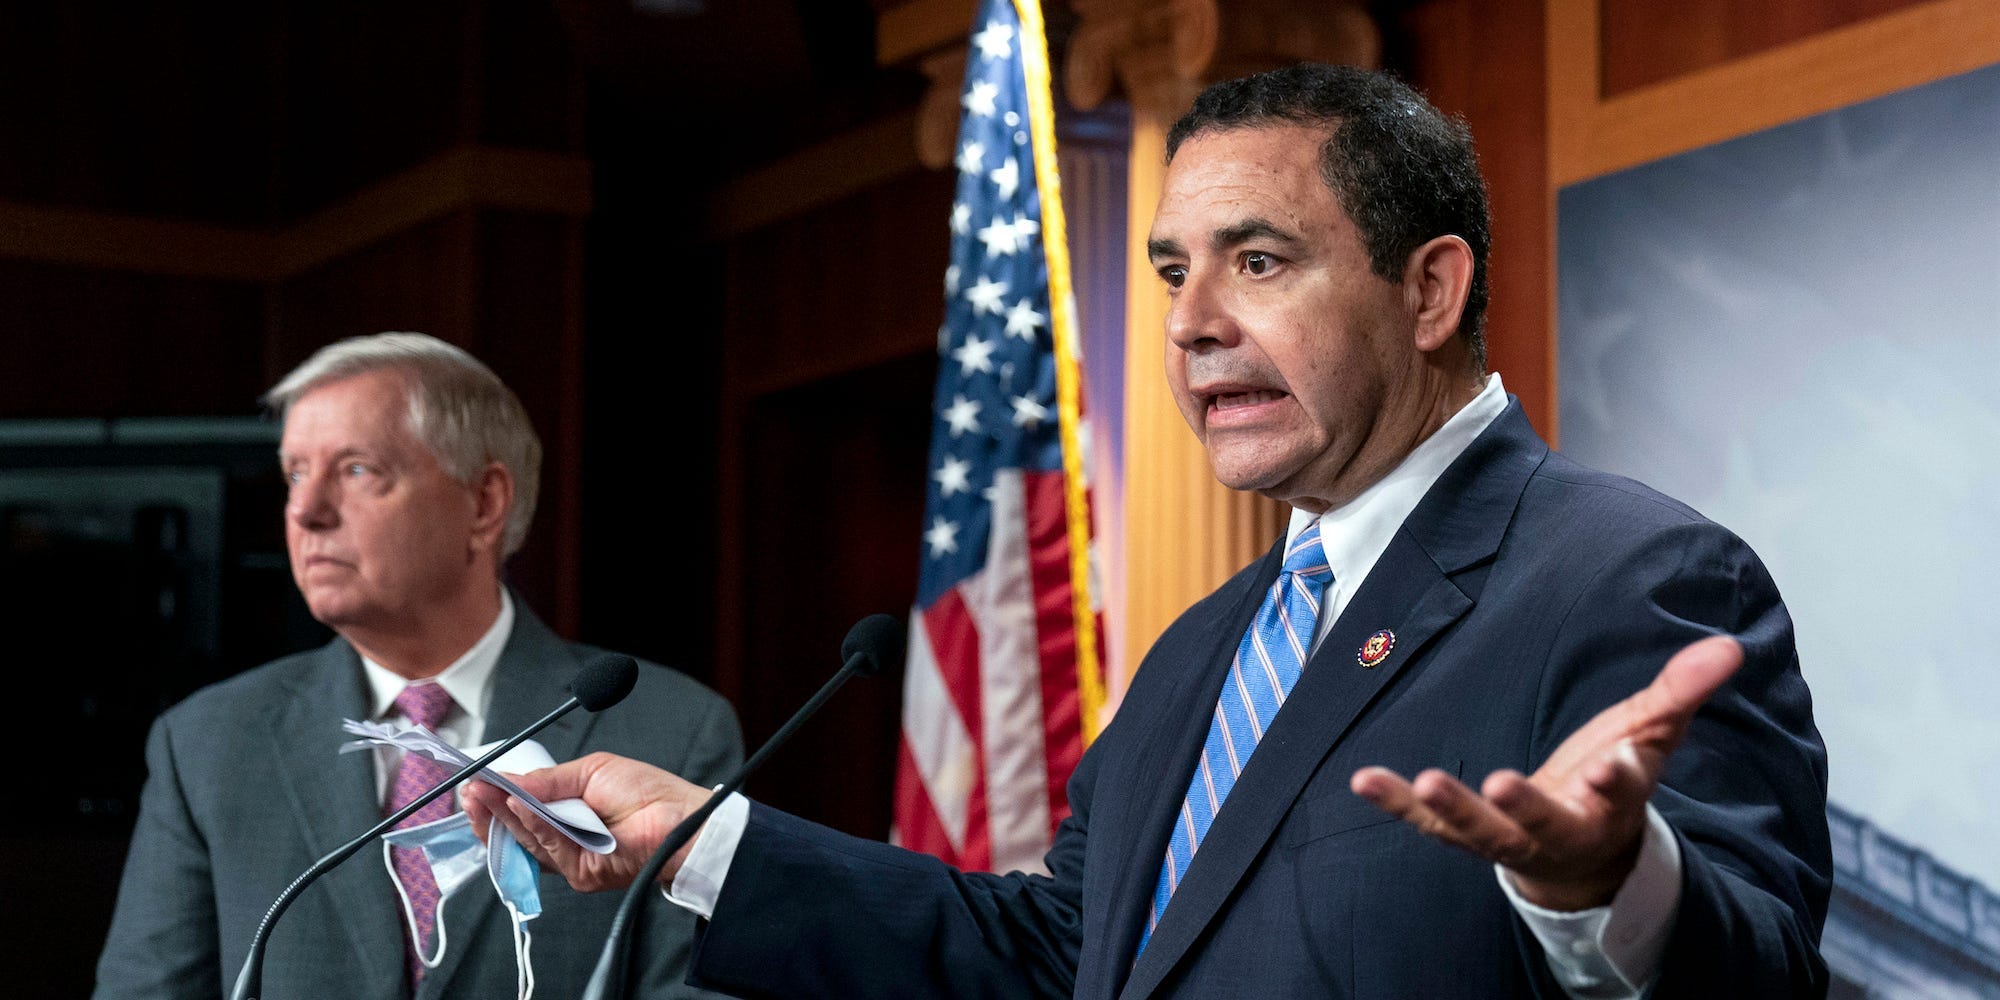 Rep. Henry Cuellar, D-Texas, with Sen. Lindsey Graham, R-S.C., speaks about the United States-Mexico border during a news conference at the Capitol in Washington, Friday, July 30, 2021